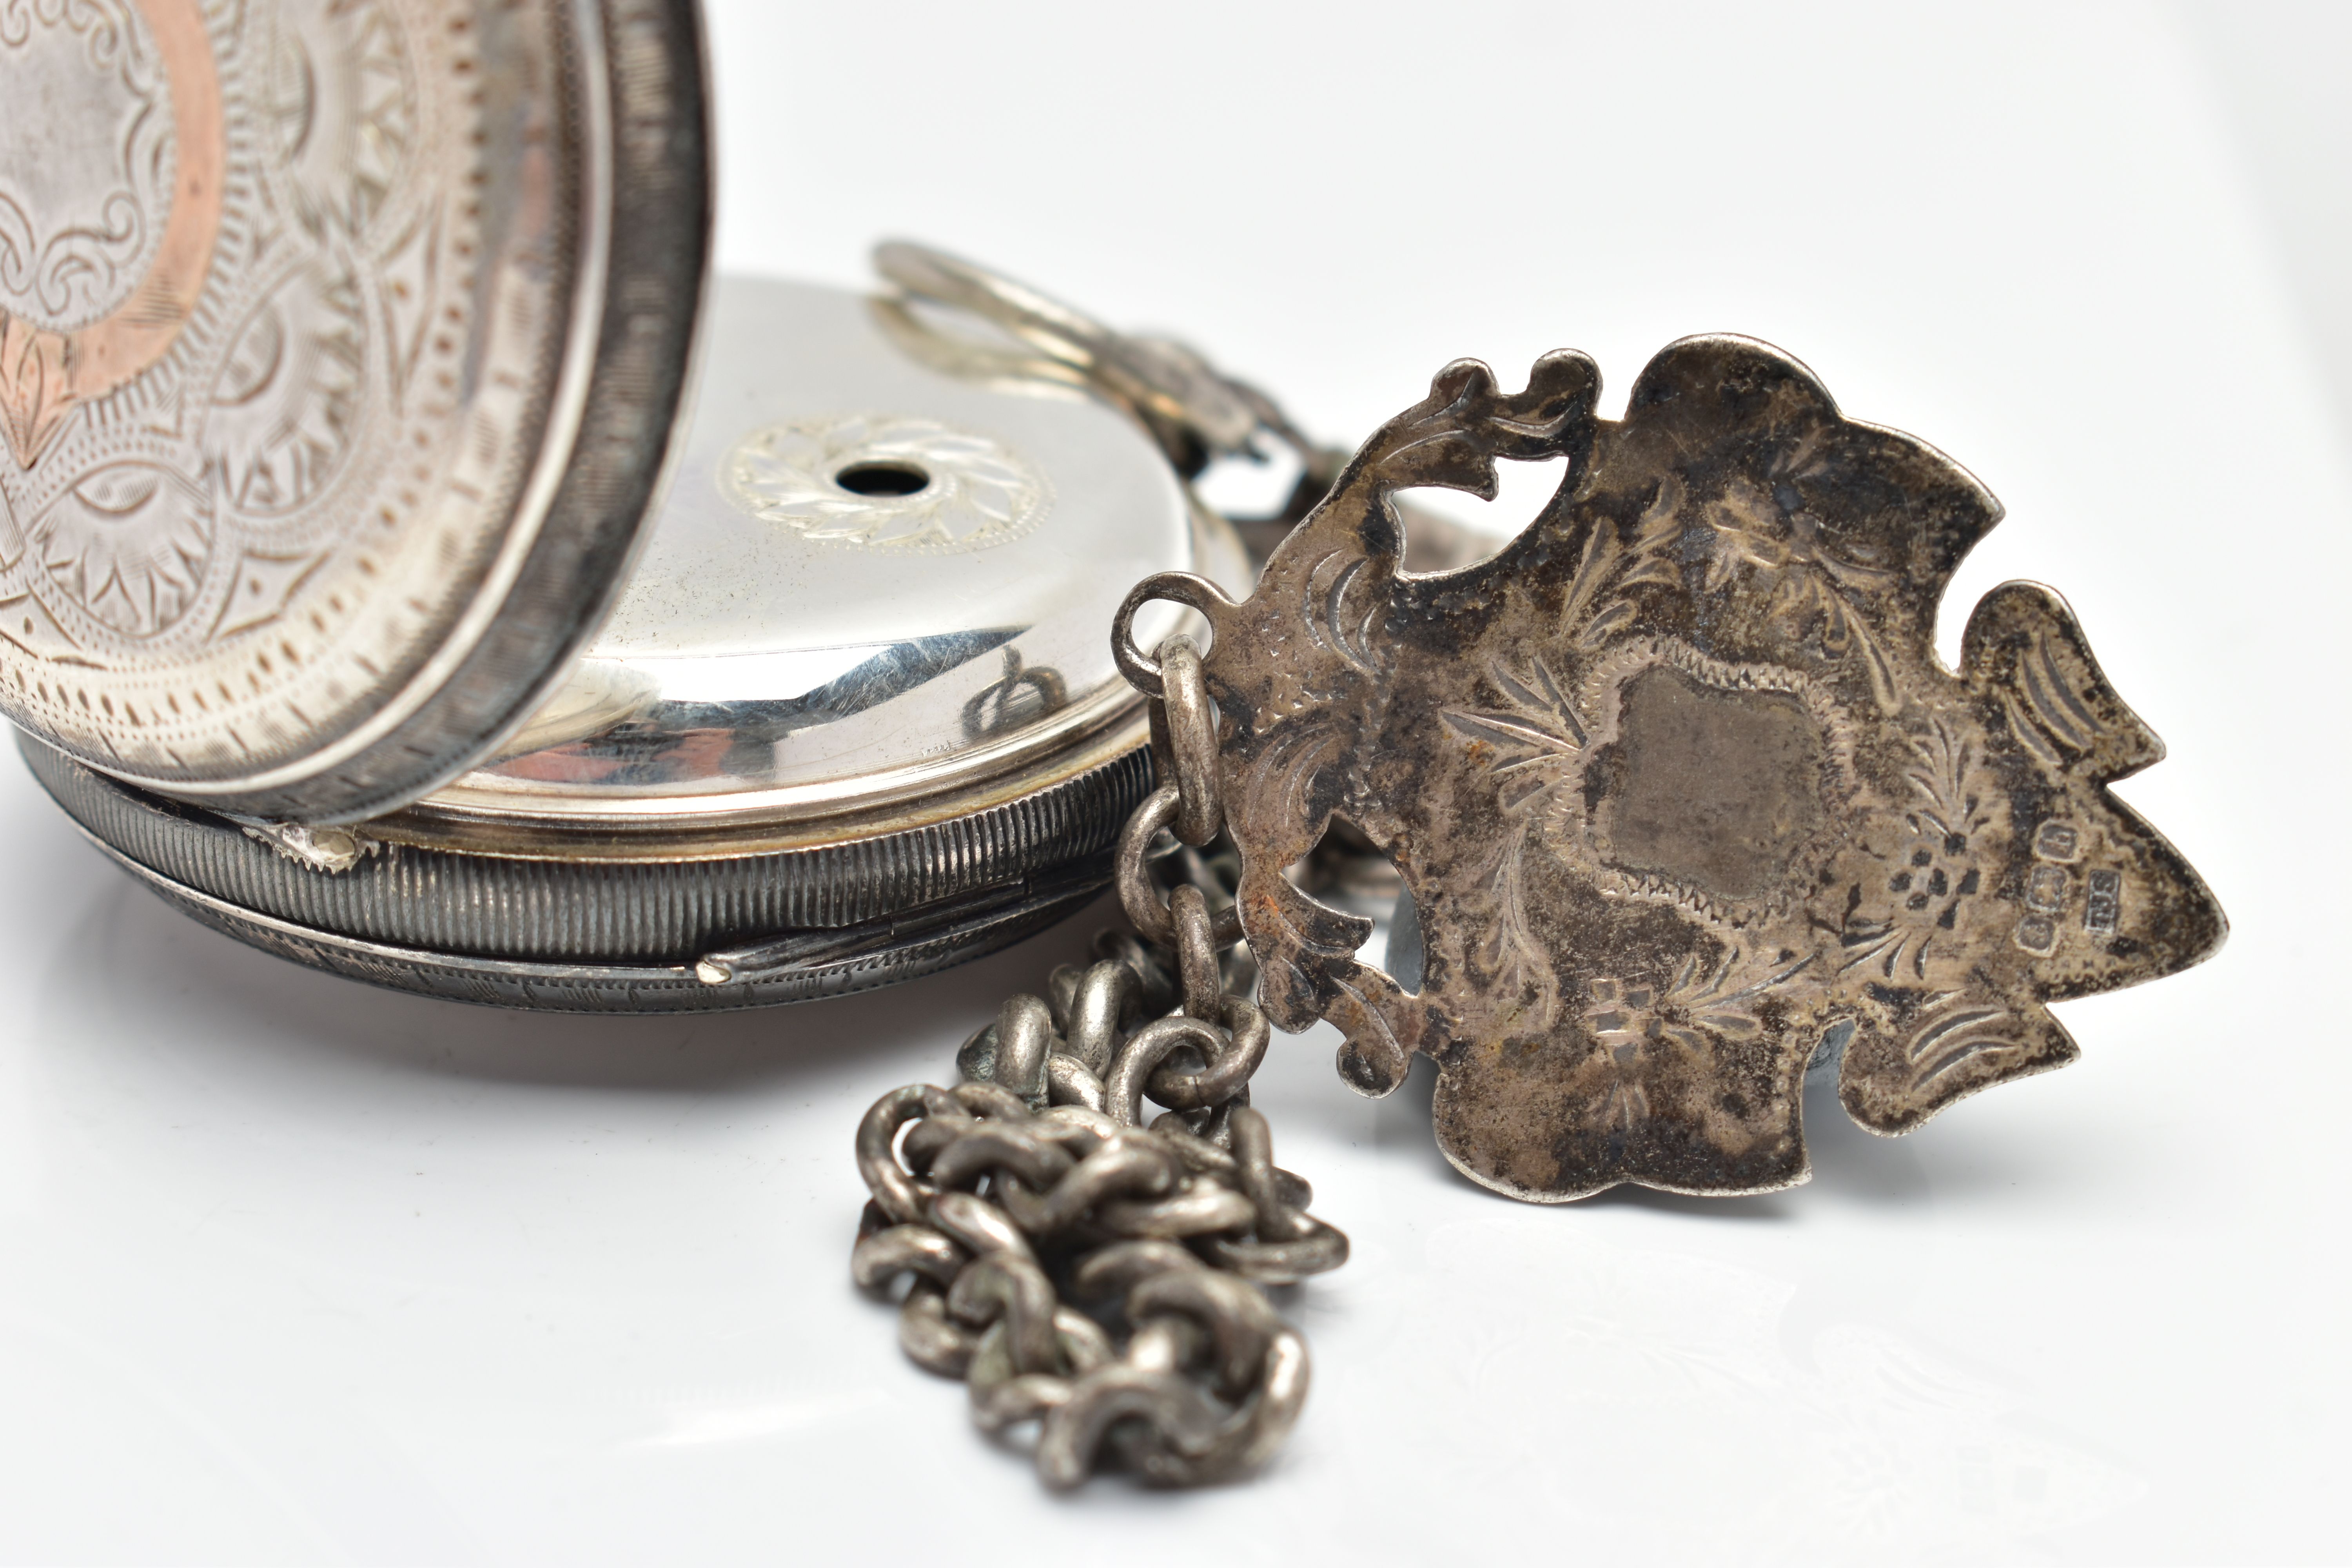 AN EARLY 20TH CENTURY OPEN FACE POCKET WATCH AND ALBERT CHAIN, the key wound pocket watch with a - Image 4 of 8